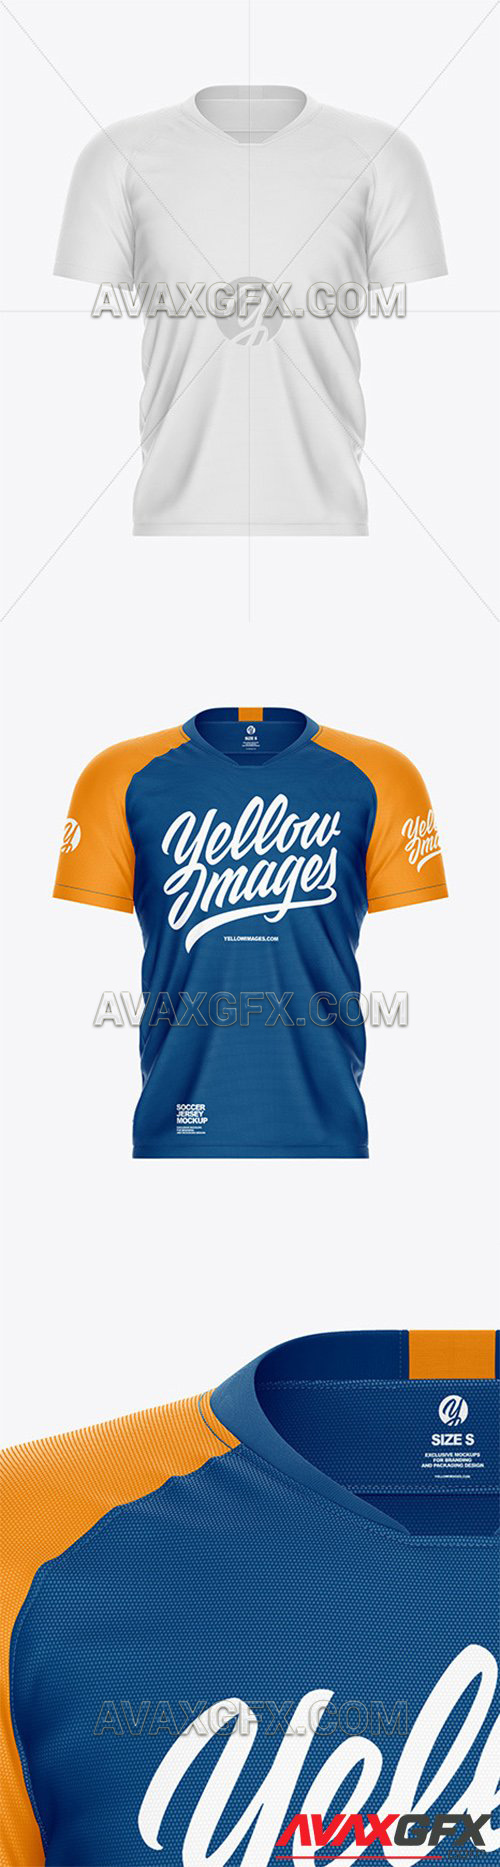 Download Men's Soccer Jersey Mockup - Front View 57454 » AVAXGFX ...